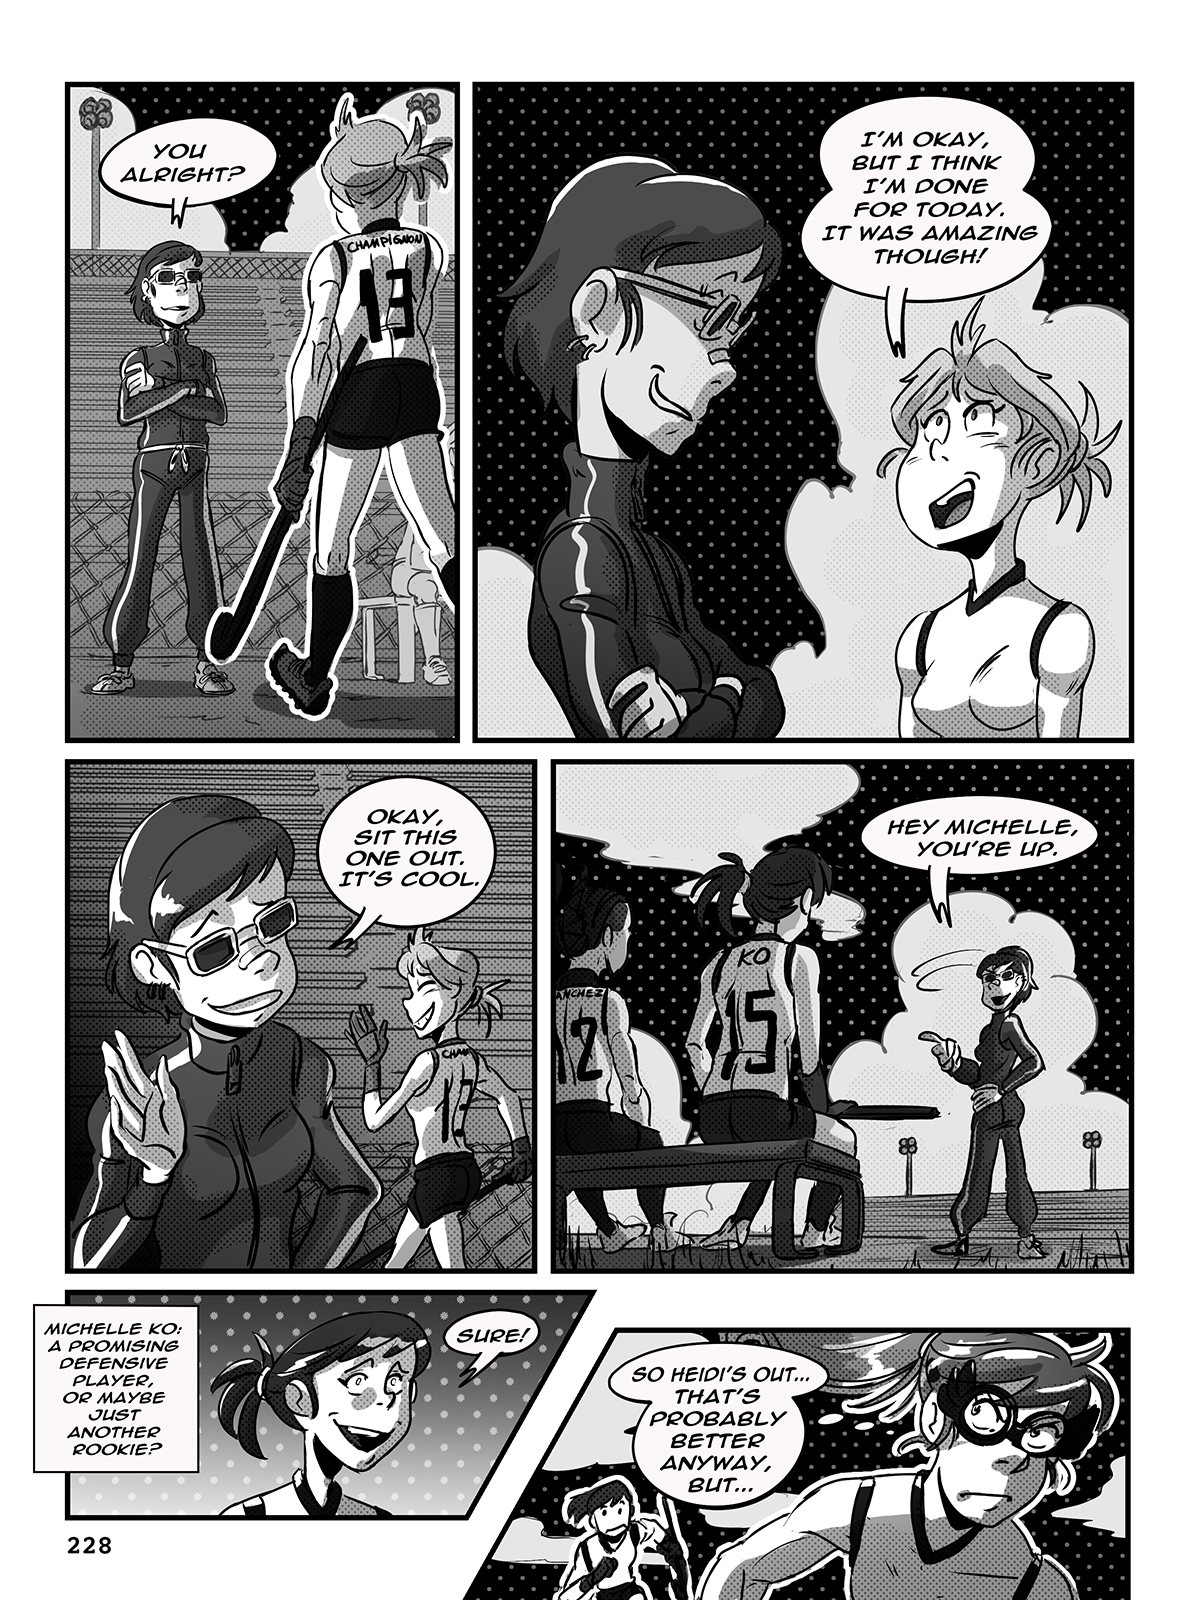 Hockey, Love, & GUTS! – Chapter 9 – Page 228